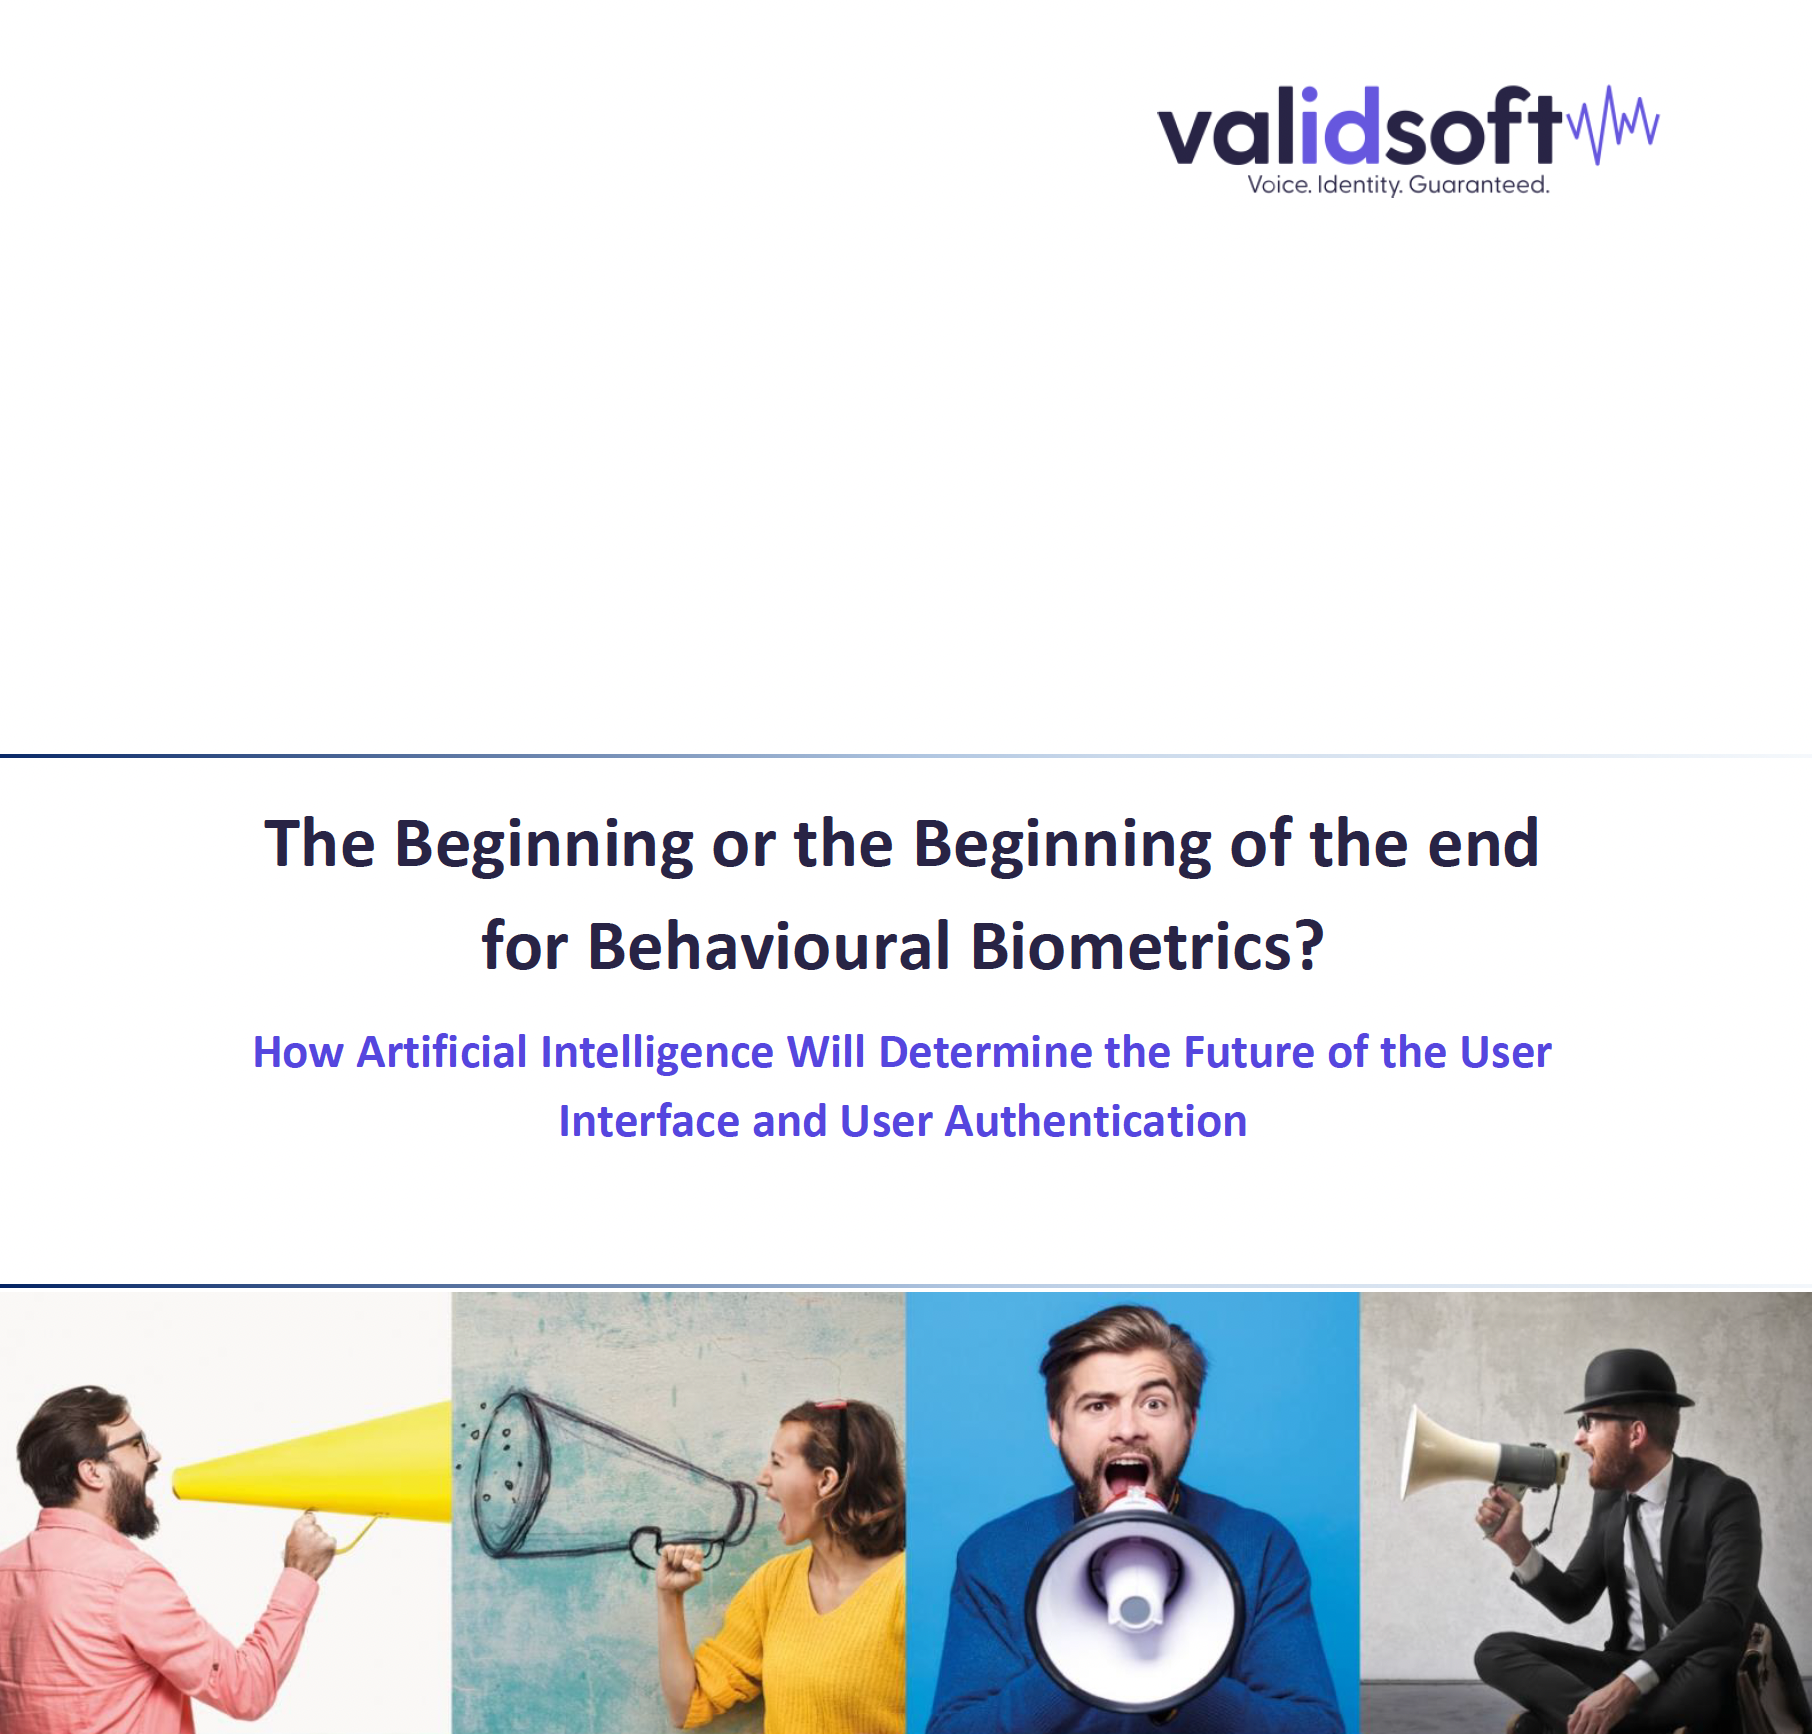 The Beginning or the Beginning of the End for Behavioural Biometrics